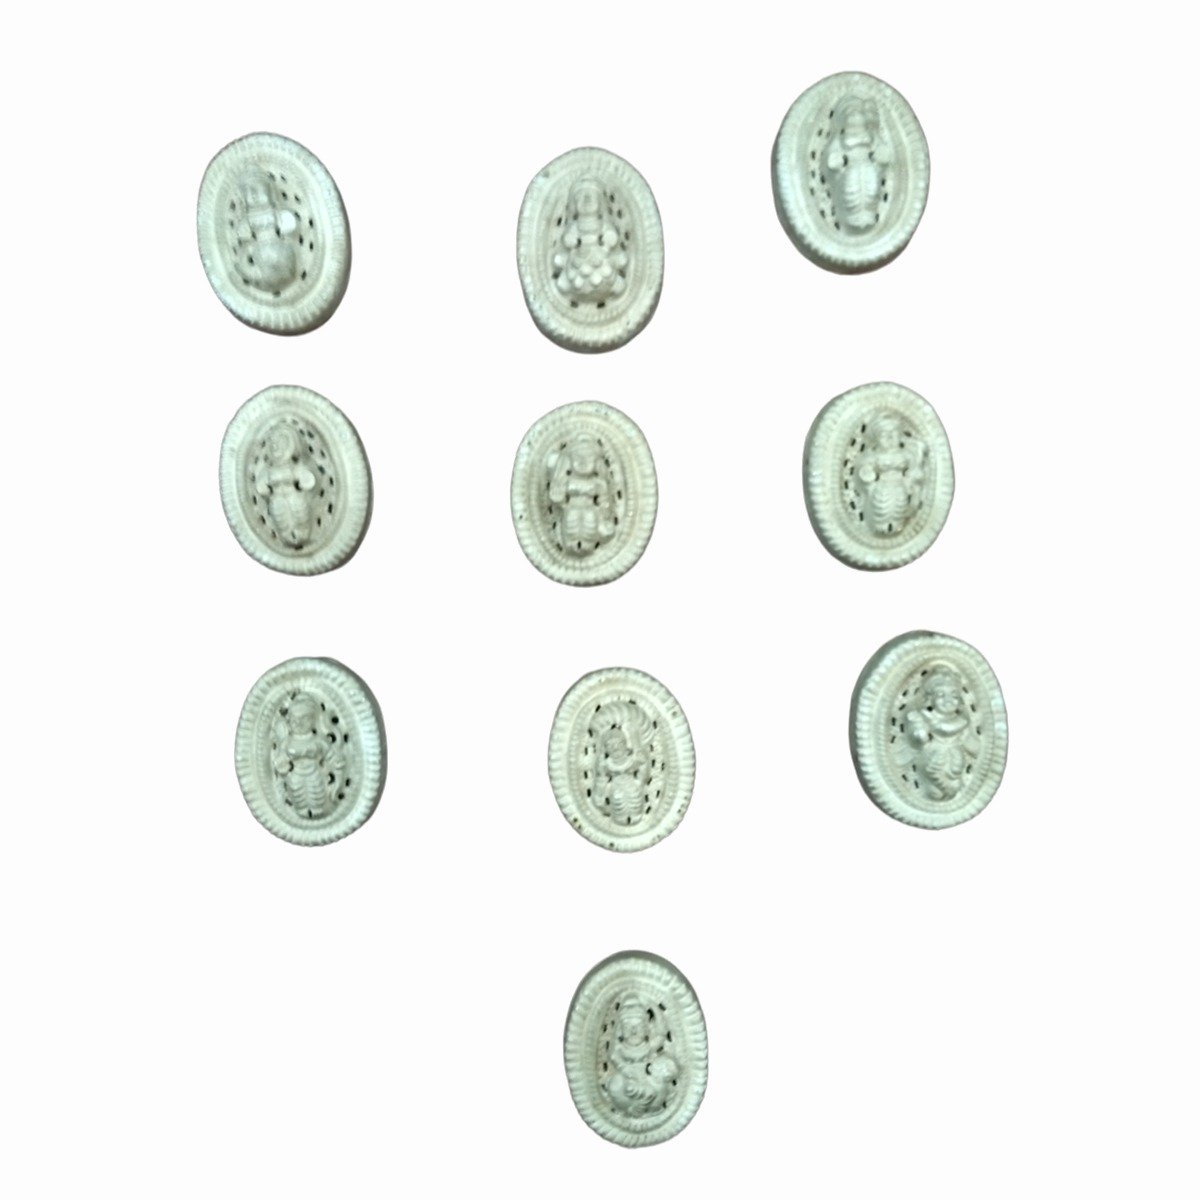 SILVER PCS OF OVAL COINS FOR POOJA